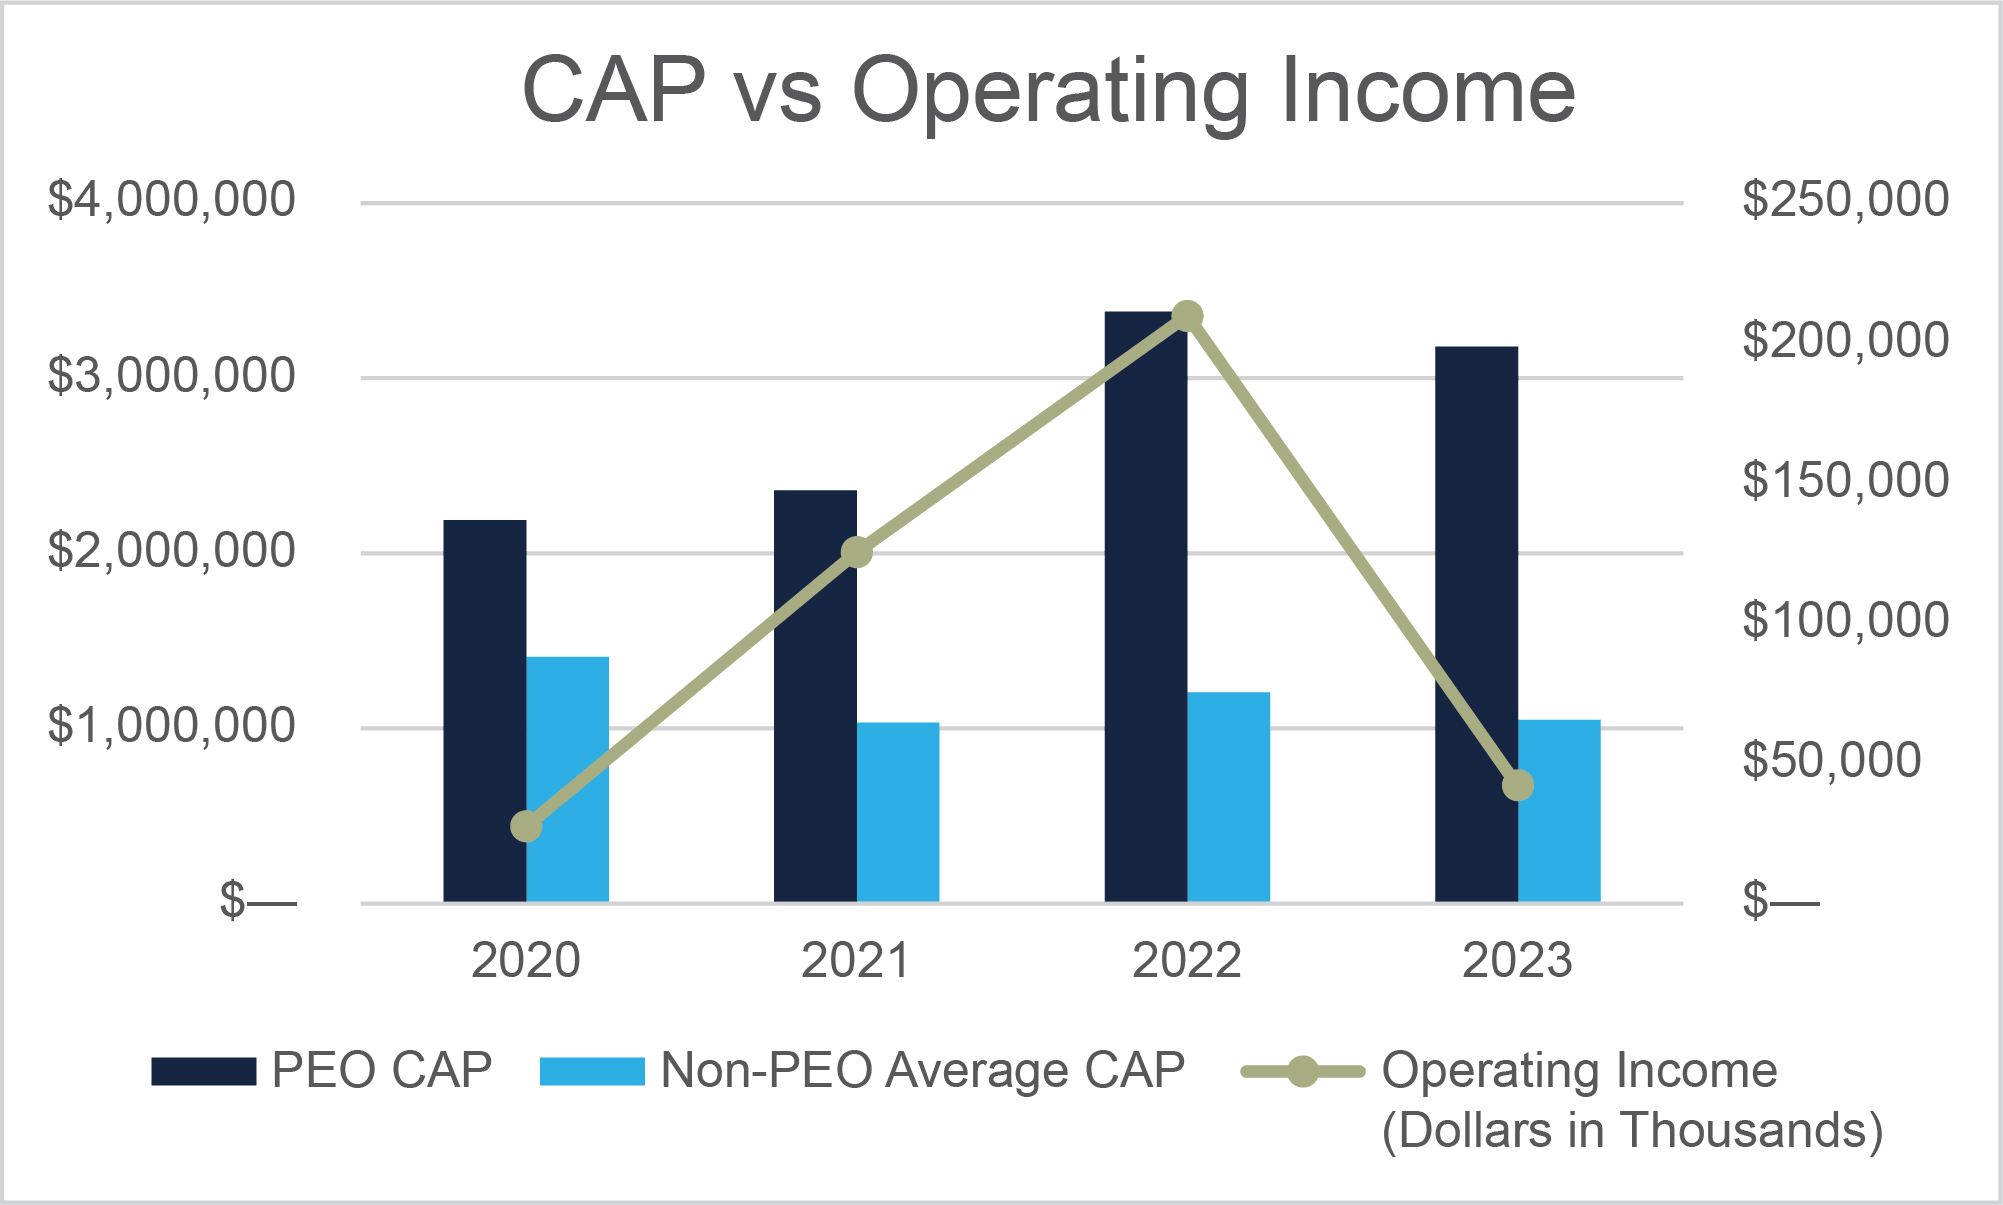 Mixed bar/line graph in millions showing PEO CAP and non-PEO average CAP vs. operating income for 2021-2023